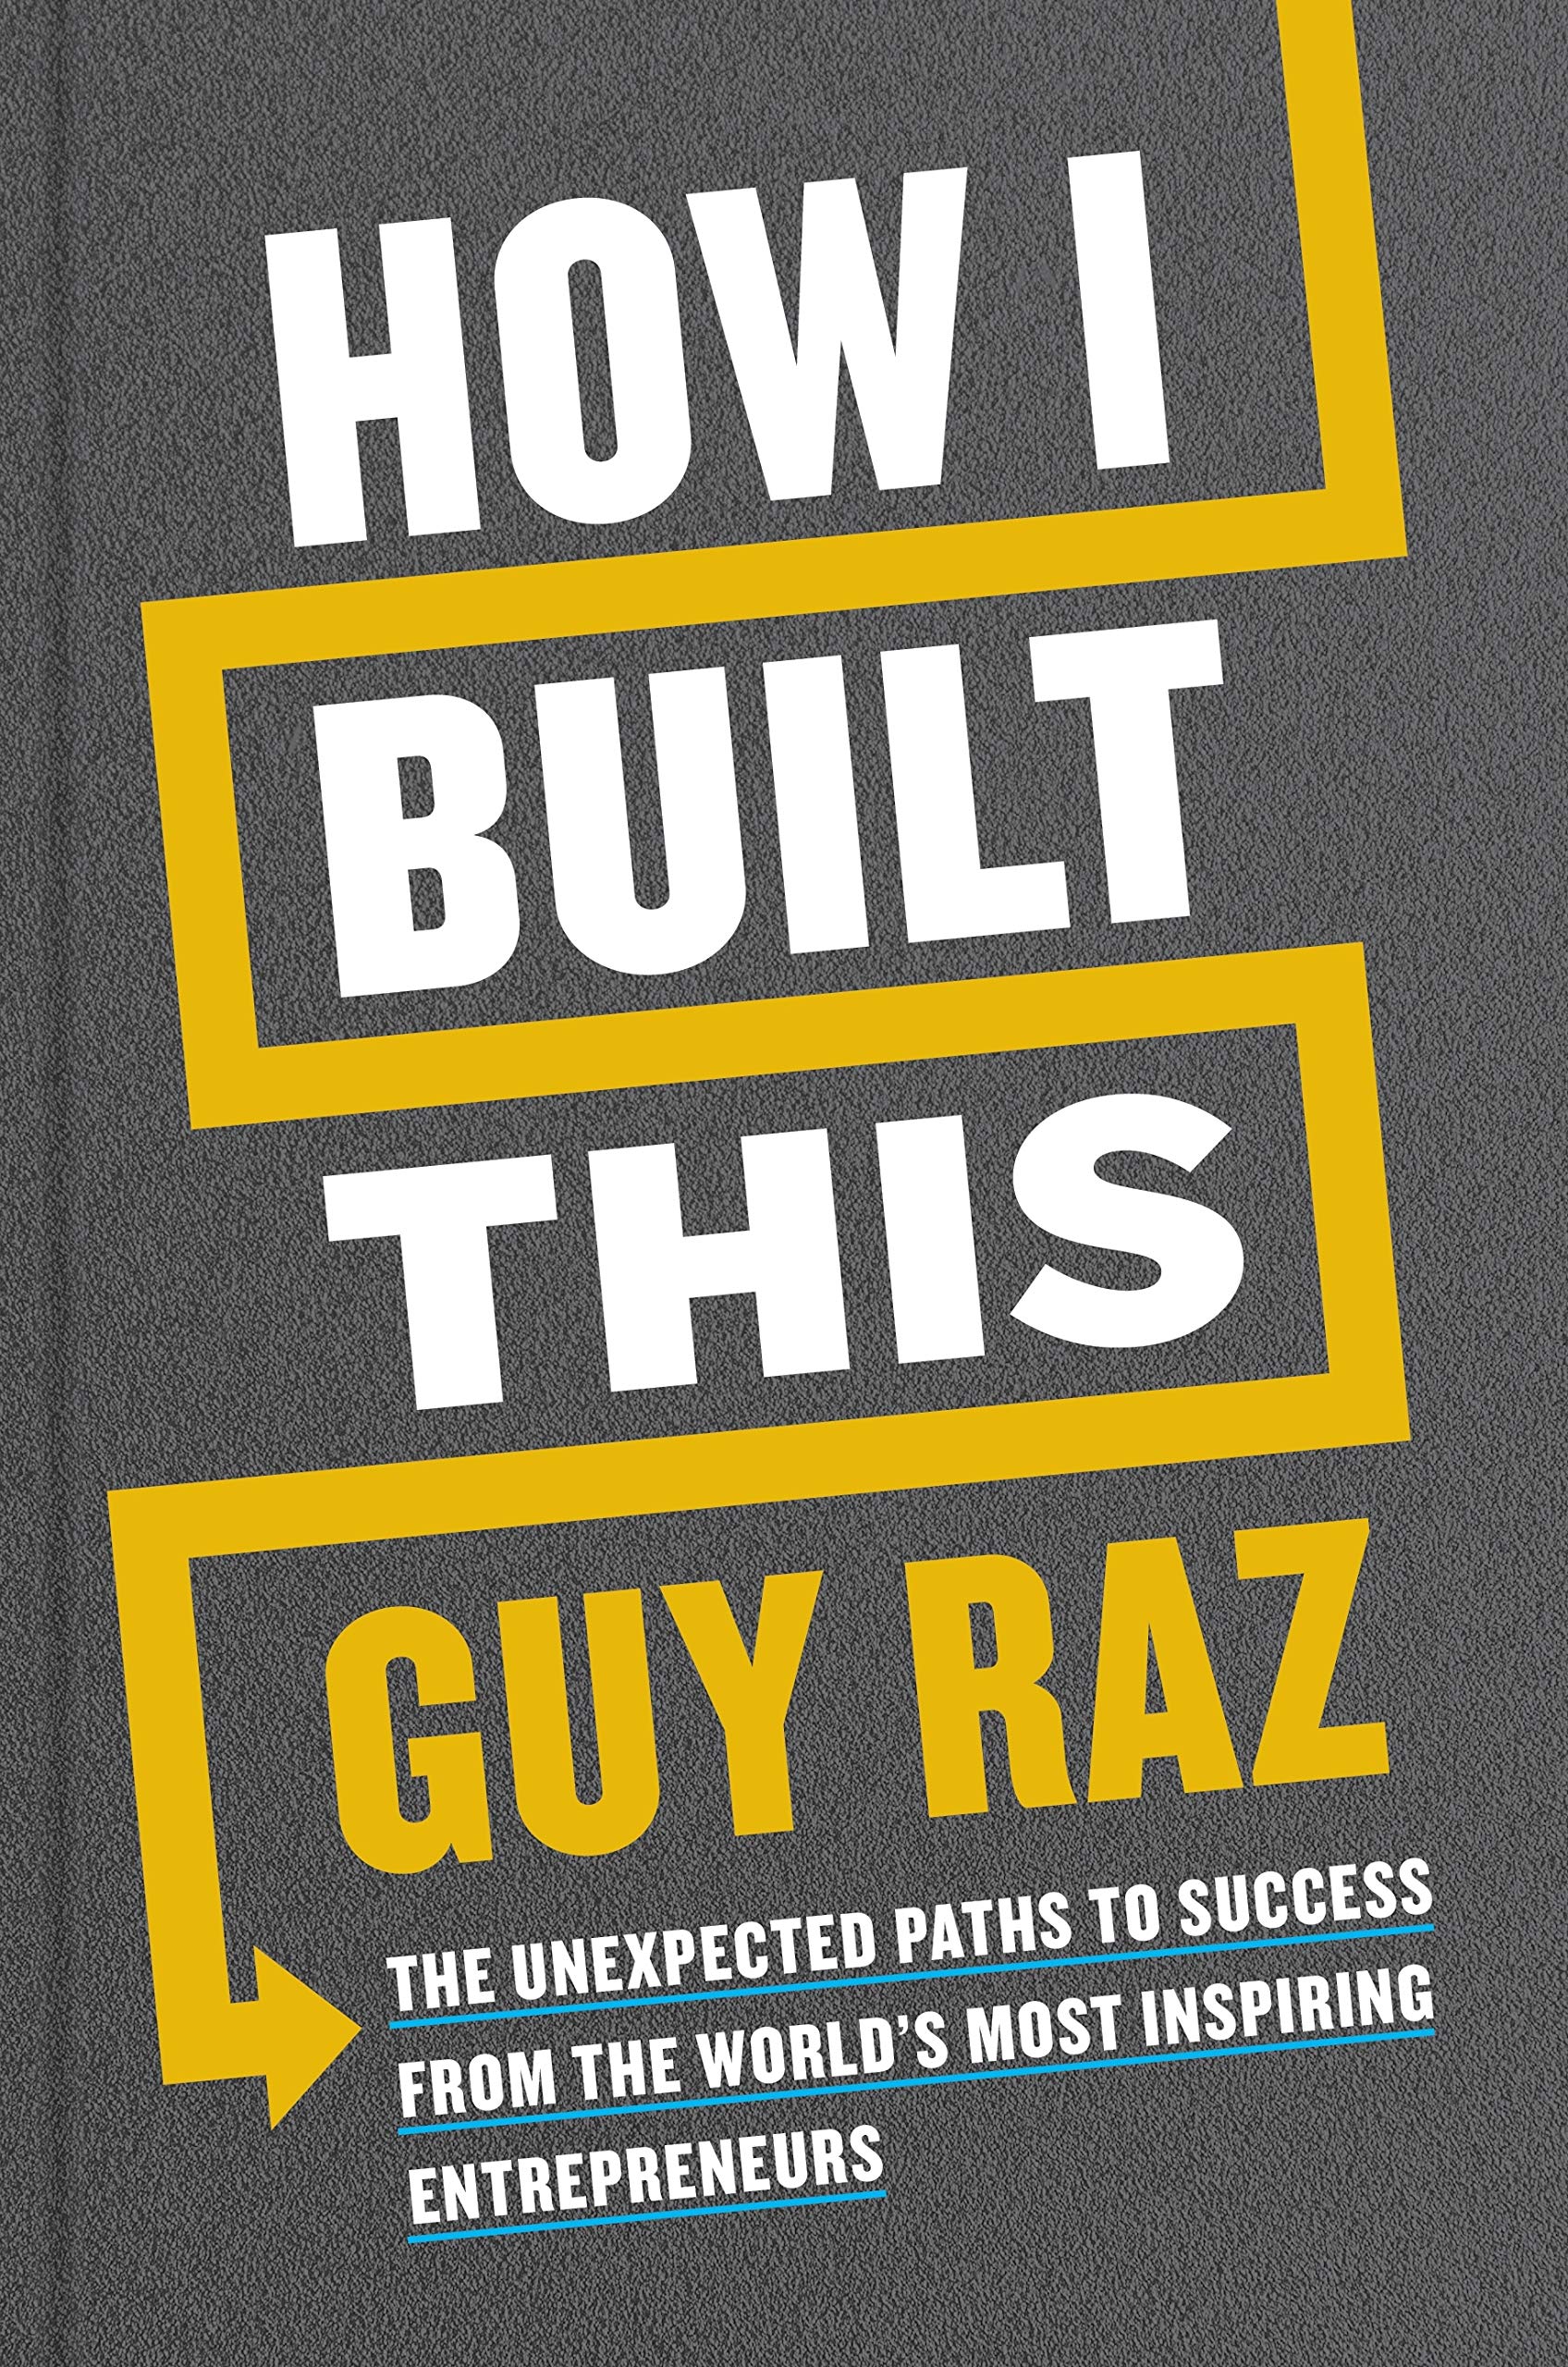 How I Built This | Built-It Productions image0